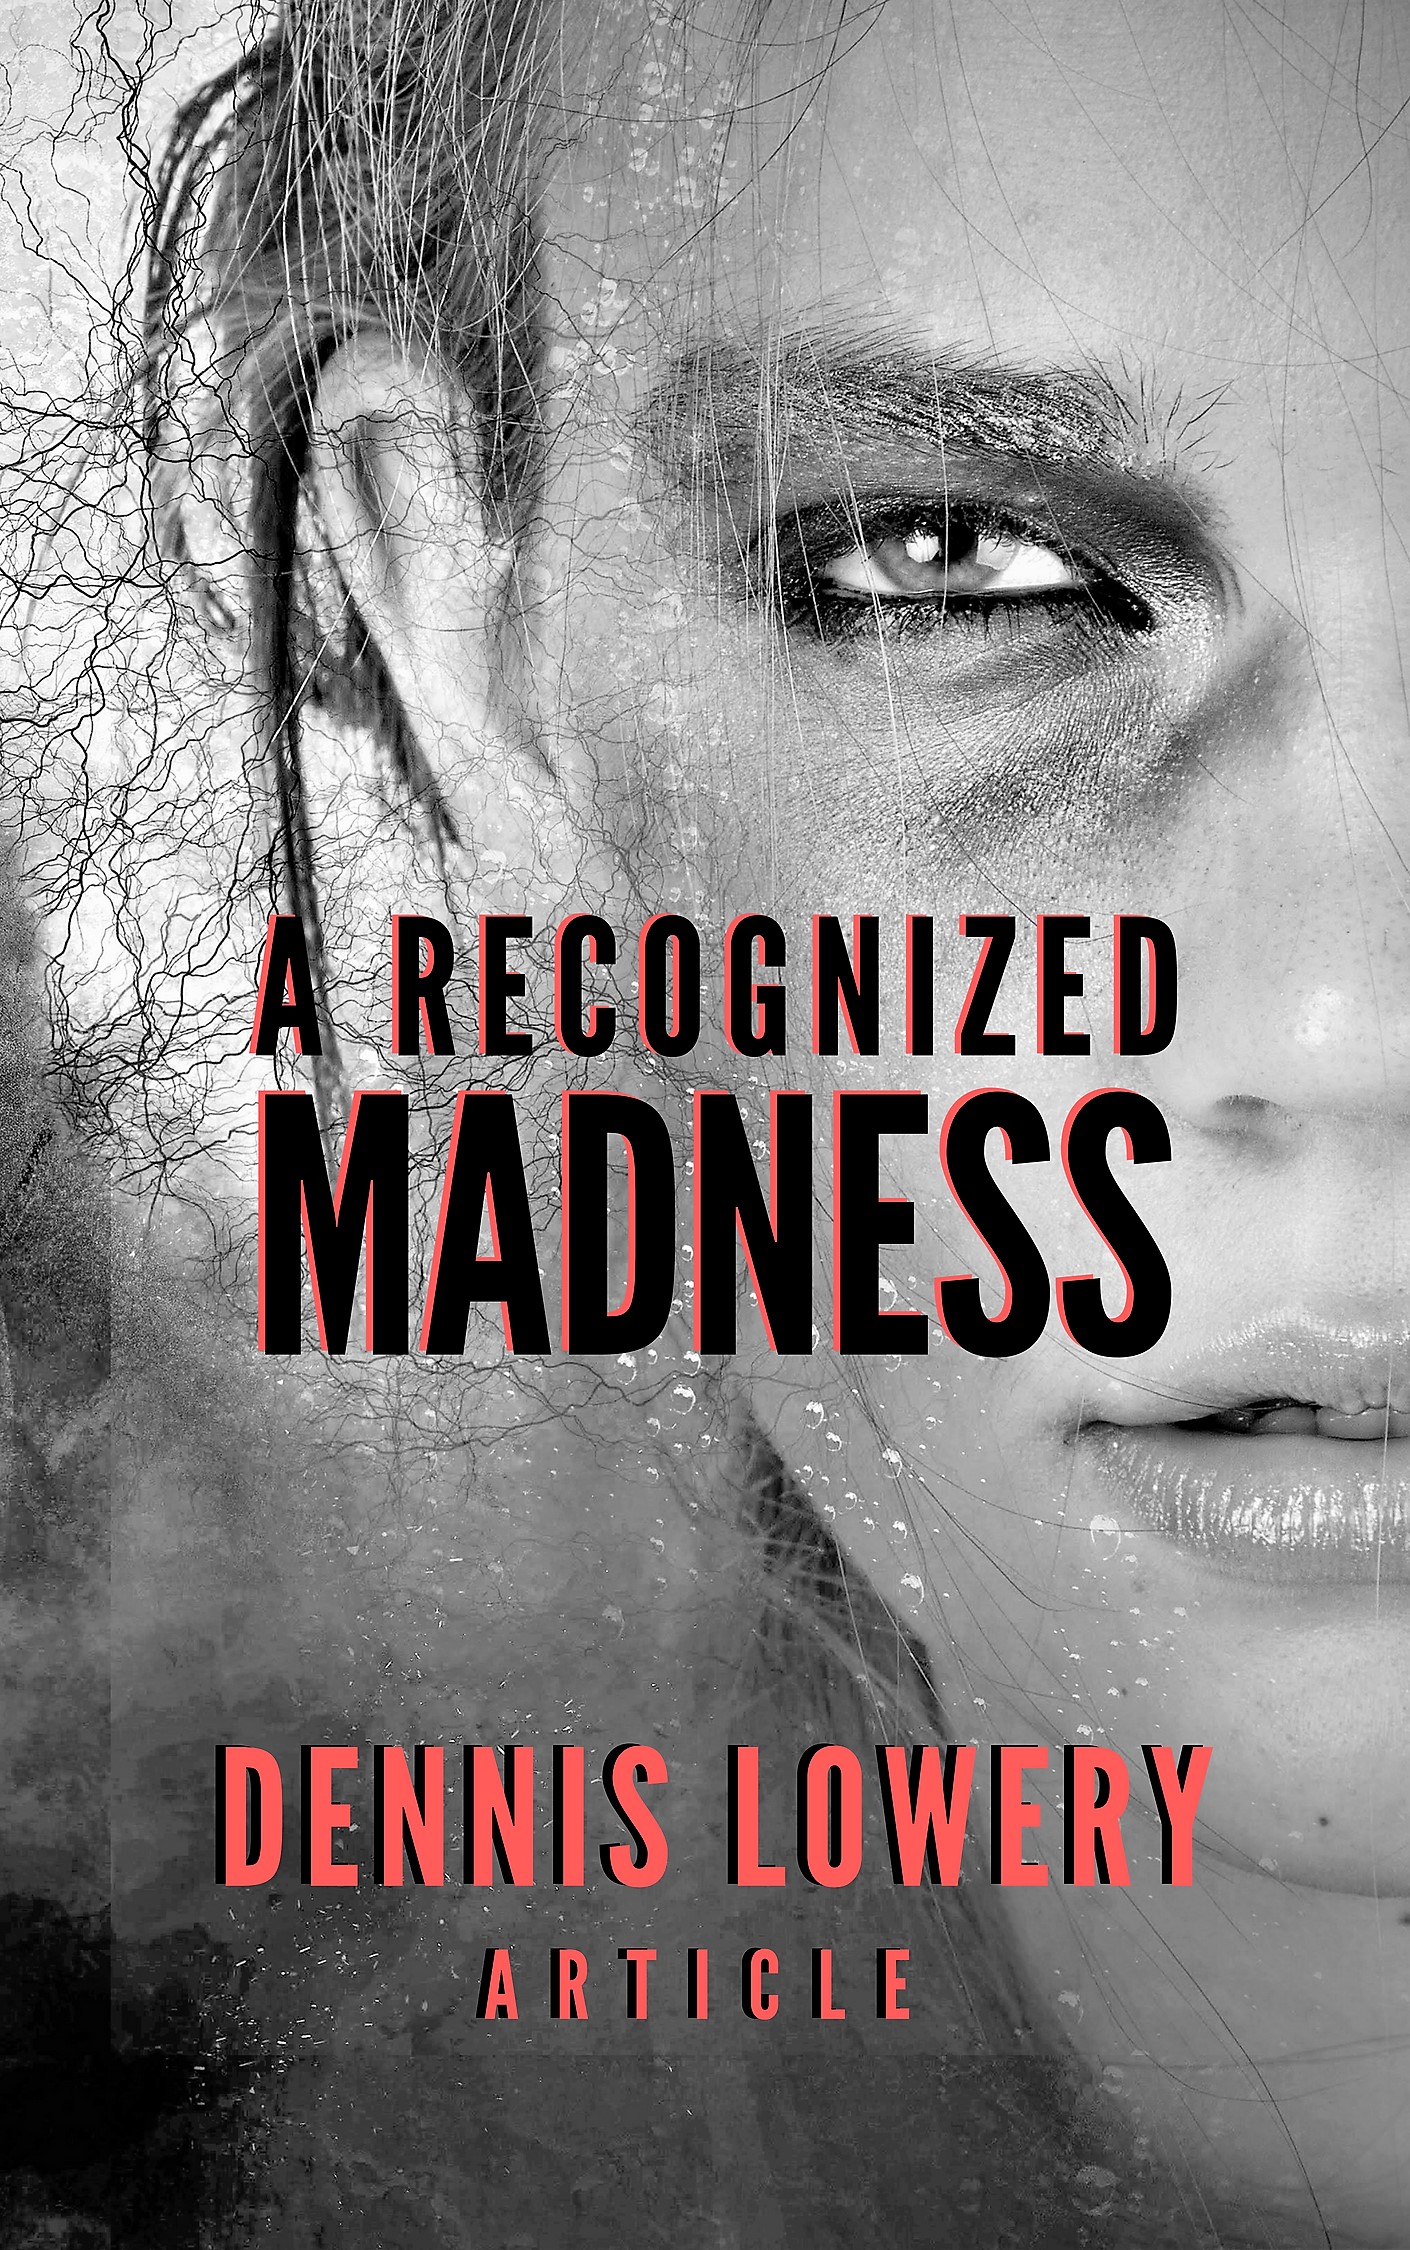 A RECOGNIZED MADNESS - by Dennis Lowery